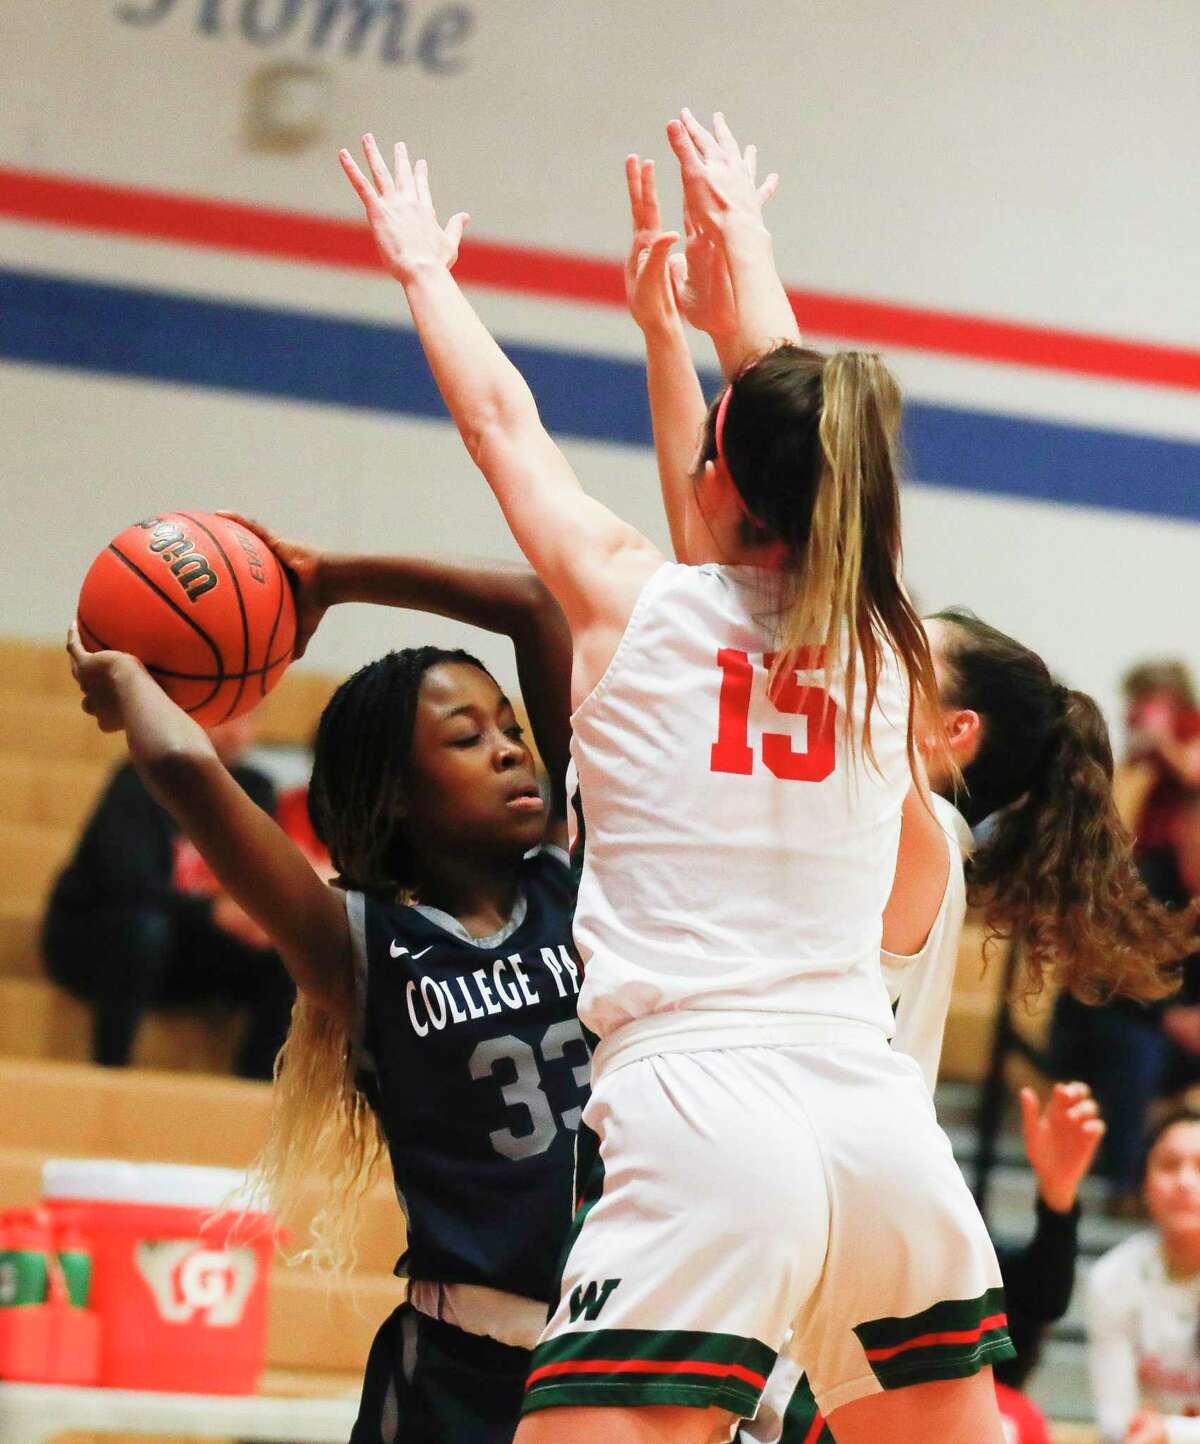 College Park power forward Natalie Ibizugbe (33) is pressured into a turnover during the first quarter of a tie-breaker high school basketball game at Oak Ridge High School, Friday, Feb. 11, 2022.